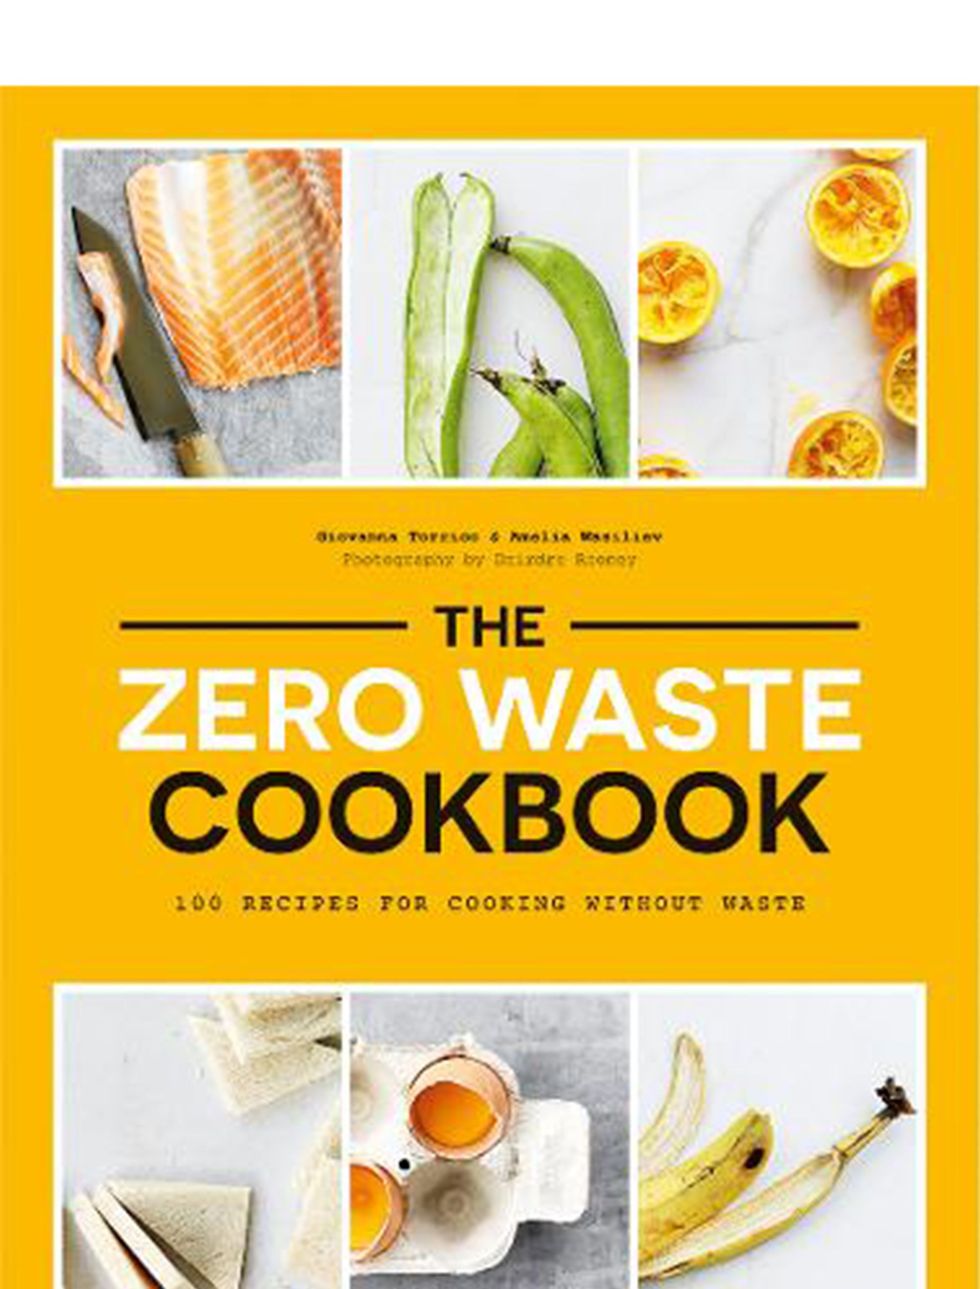  The Zero Waste Cookbook: 100 Recipes for Cooking Without Waste